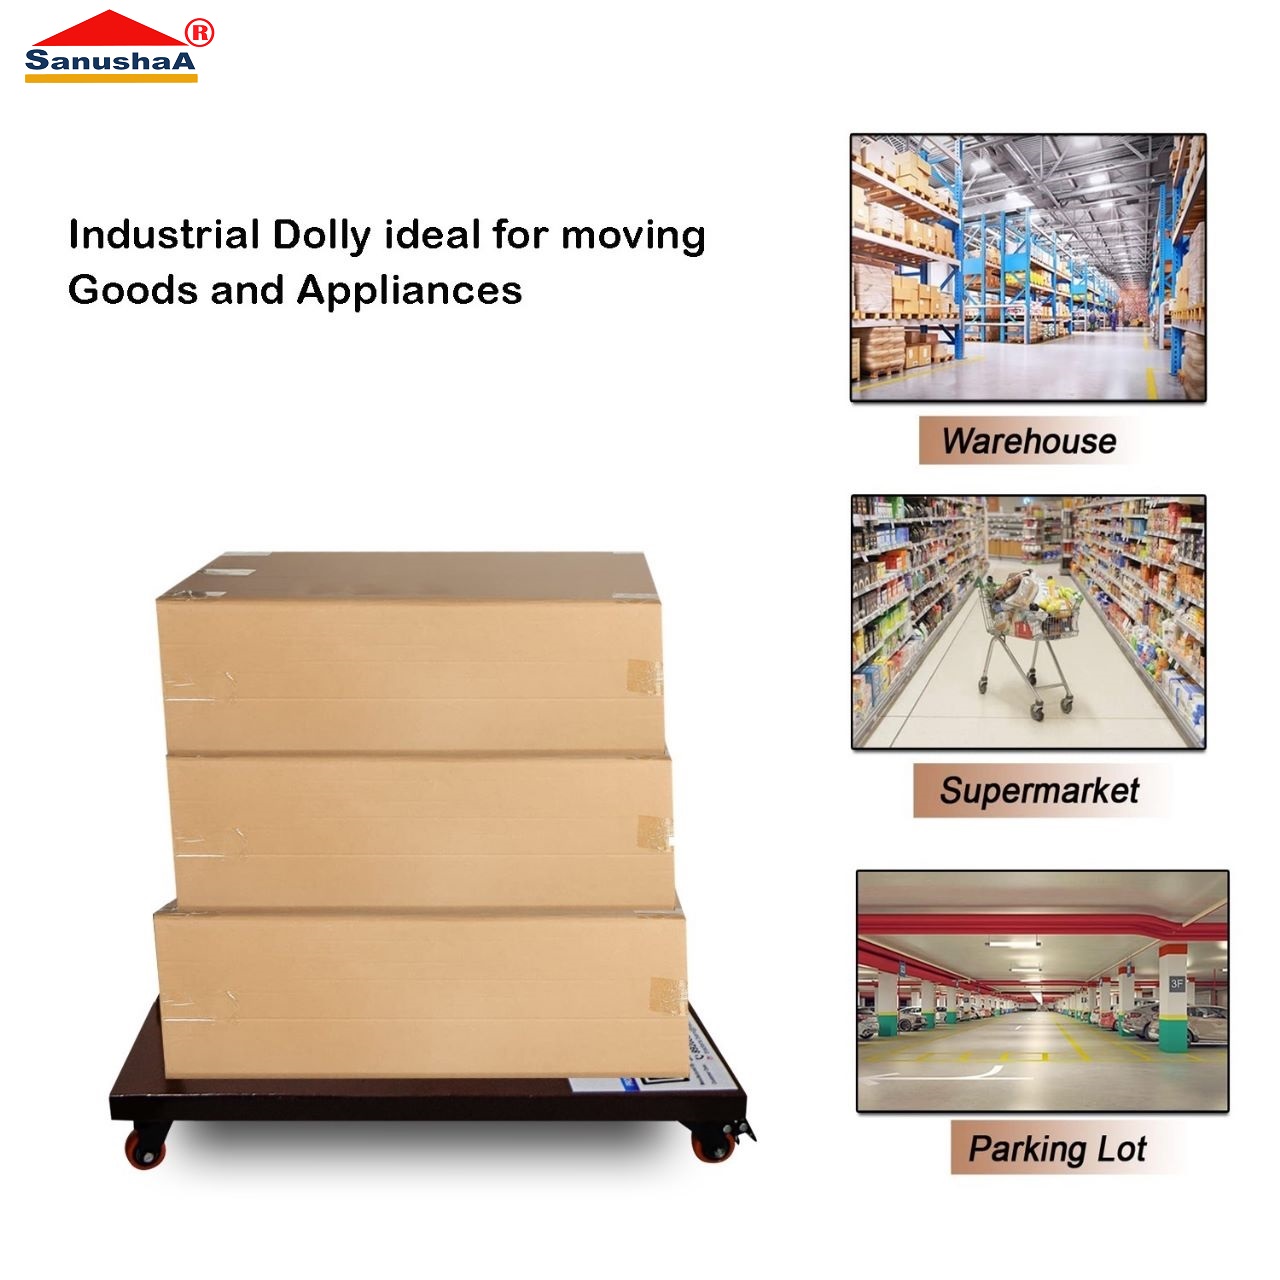 Sanushaa Iron Made Industrial Moving Trolley 450 kg, Heavy Duty Roller Transport Trolley Aid with wheels. Call 8826891304 or visit www.sanushaa.in